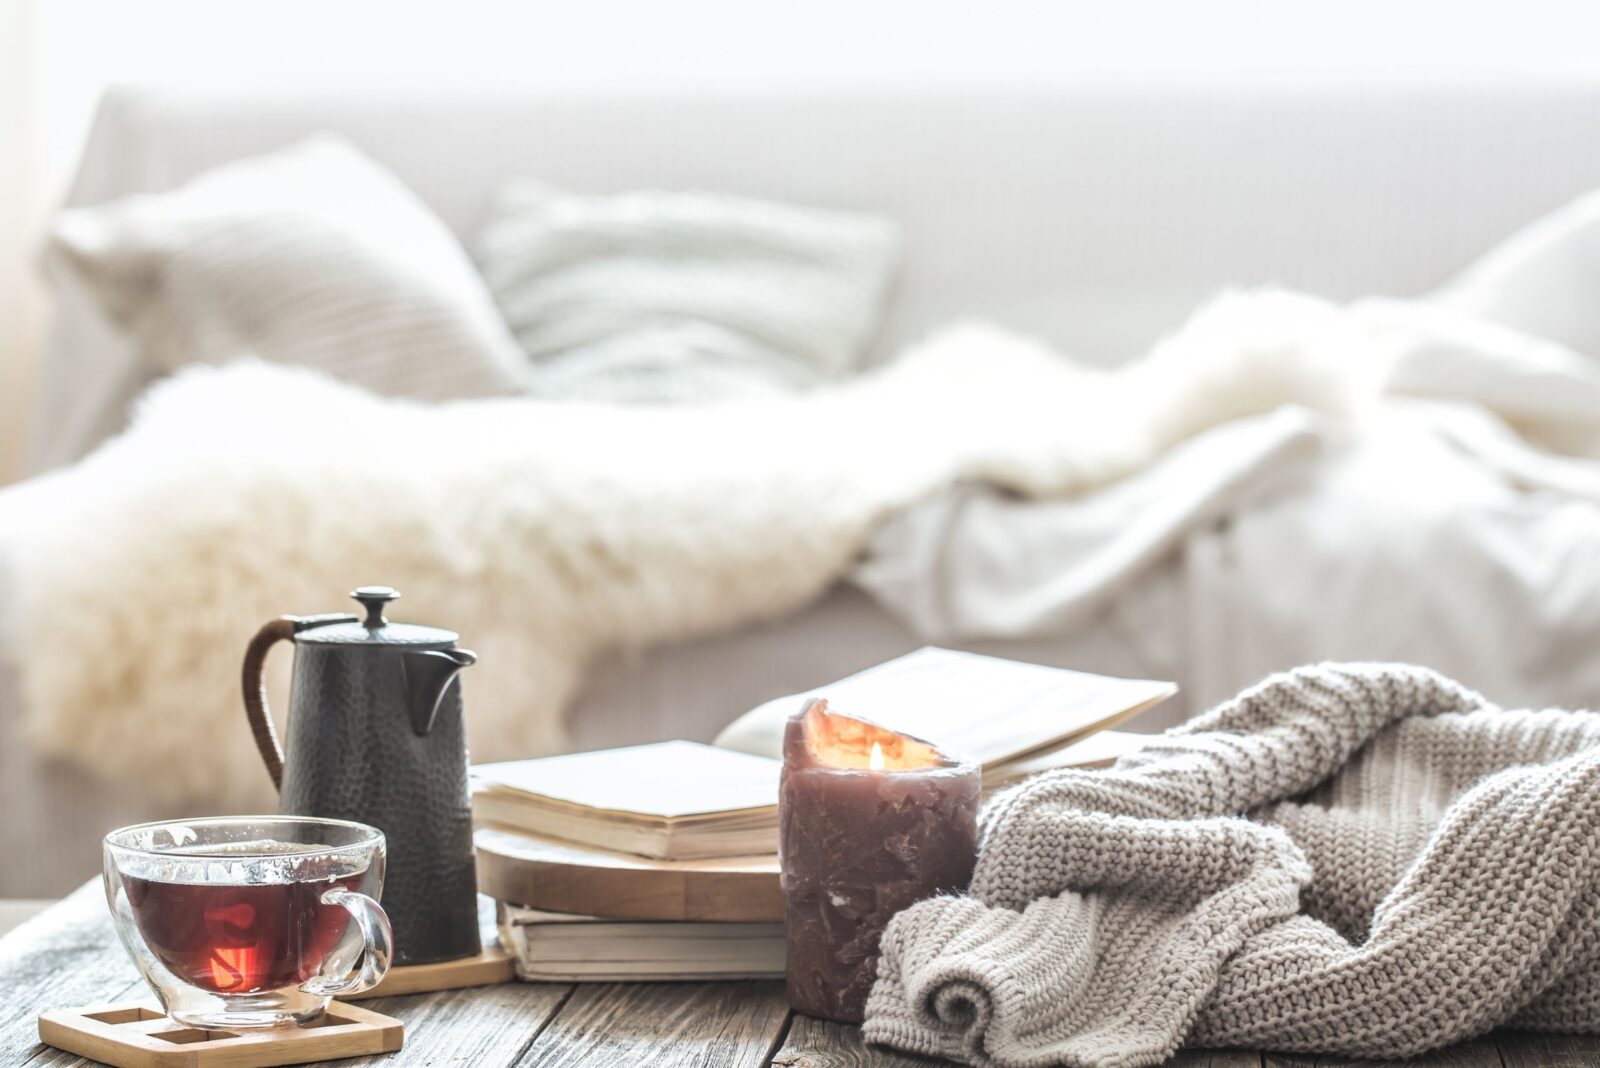 The Best Winter Essentials Our Editors Use to Stay Warm and Cozy